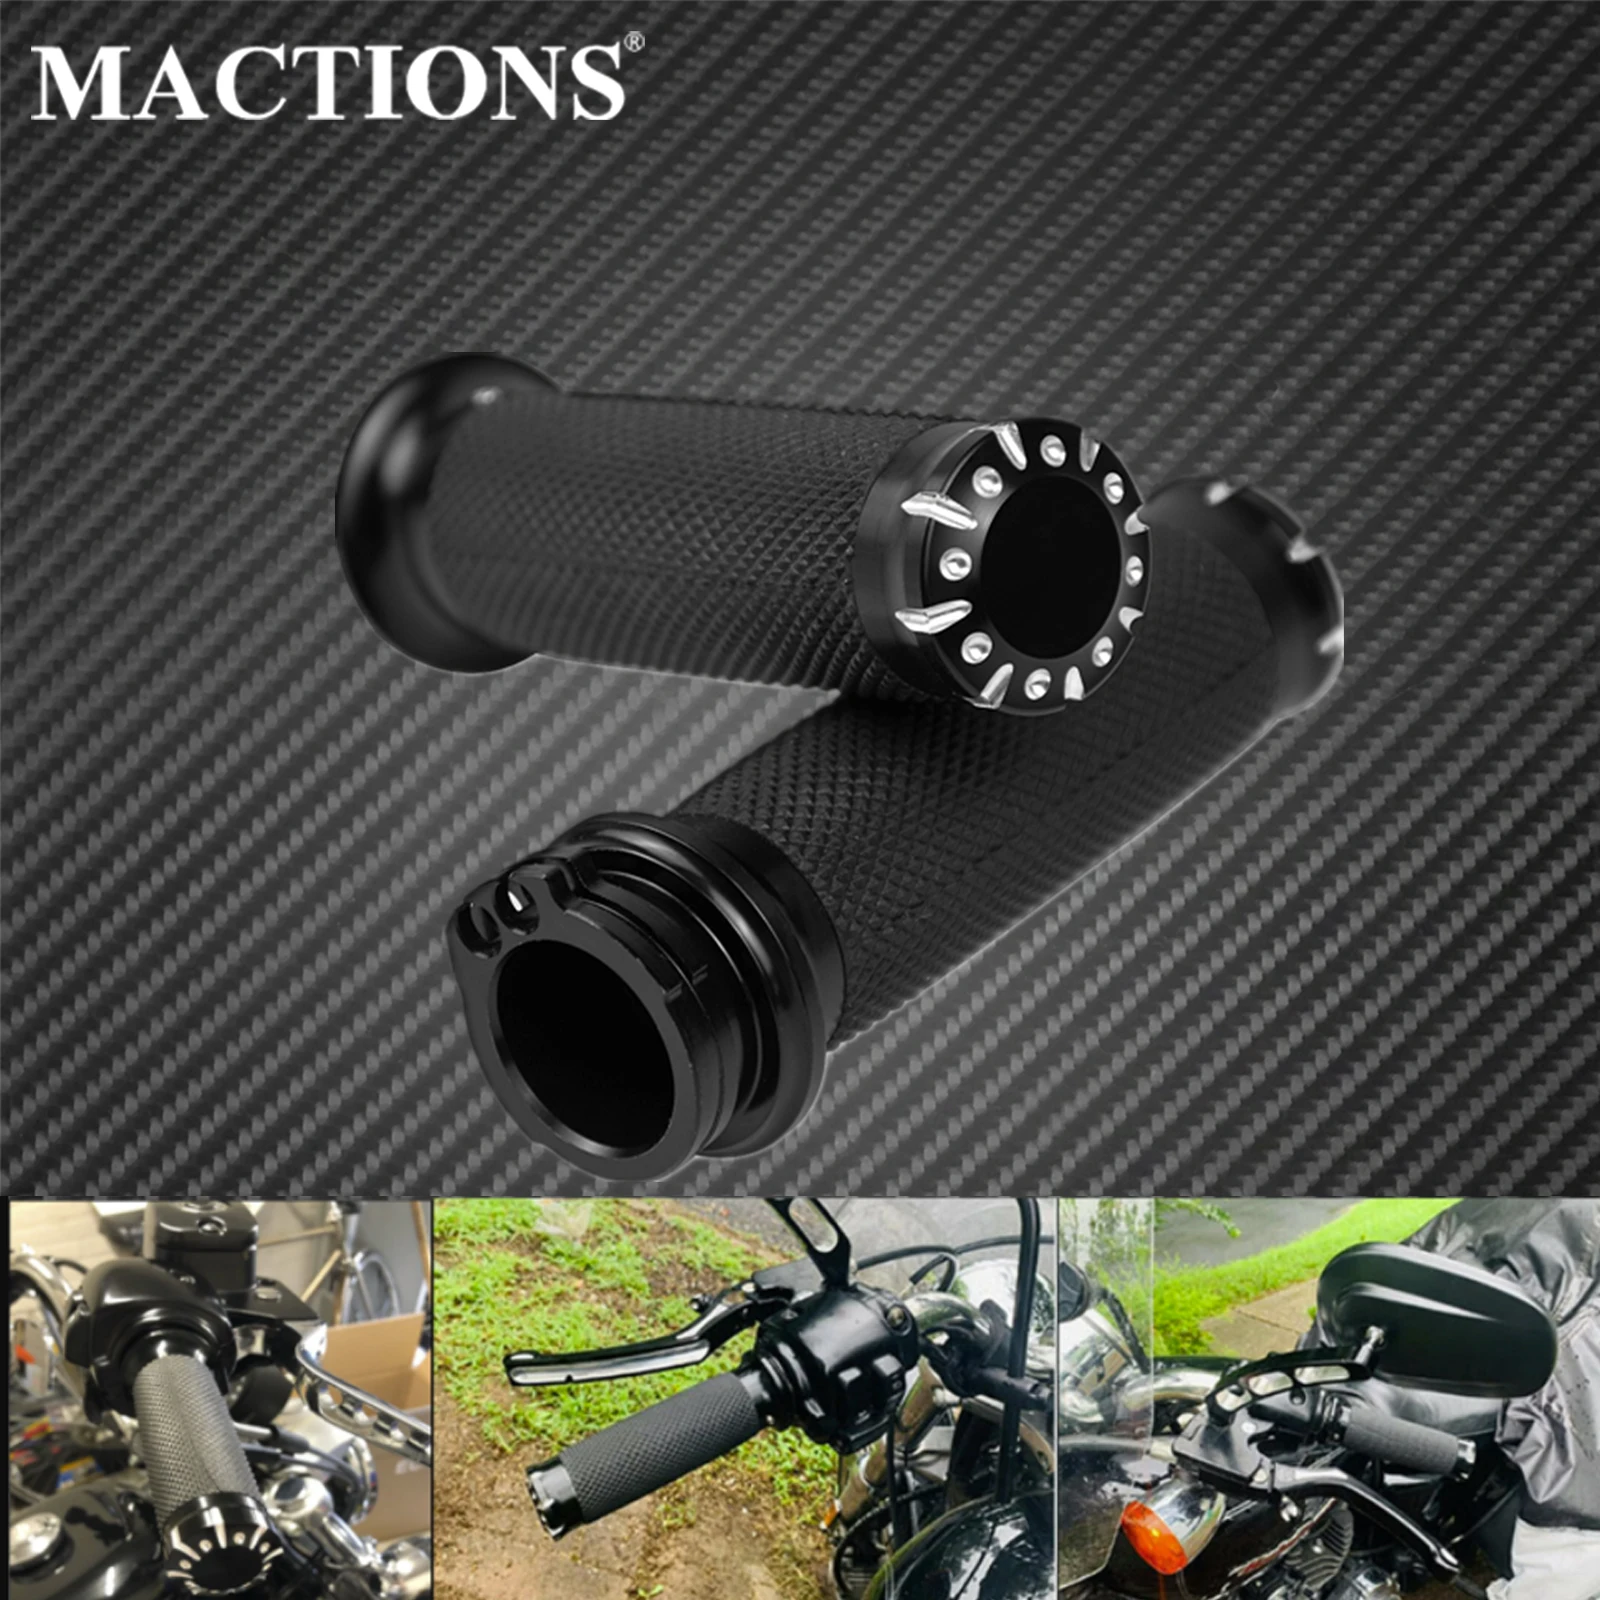 Motorcycle Black CNC 1 25mm Handlebar Hand Grips for Harley Sportster XL883 XL1200 Touring Dyna Softail Custom 